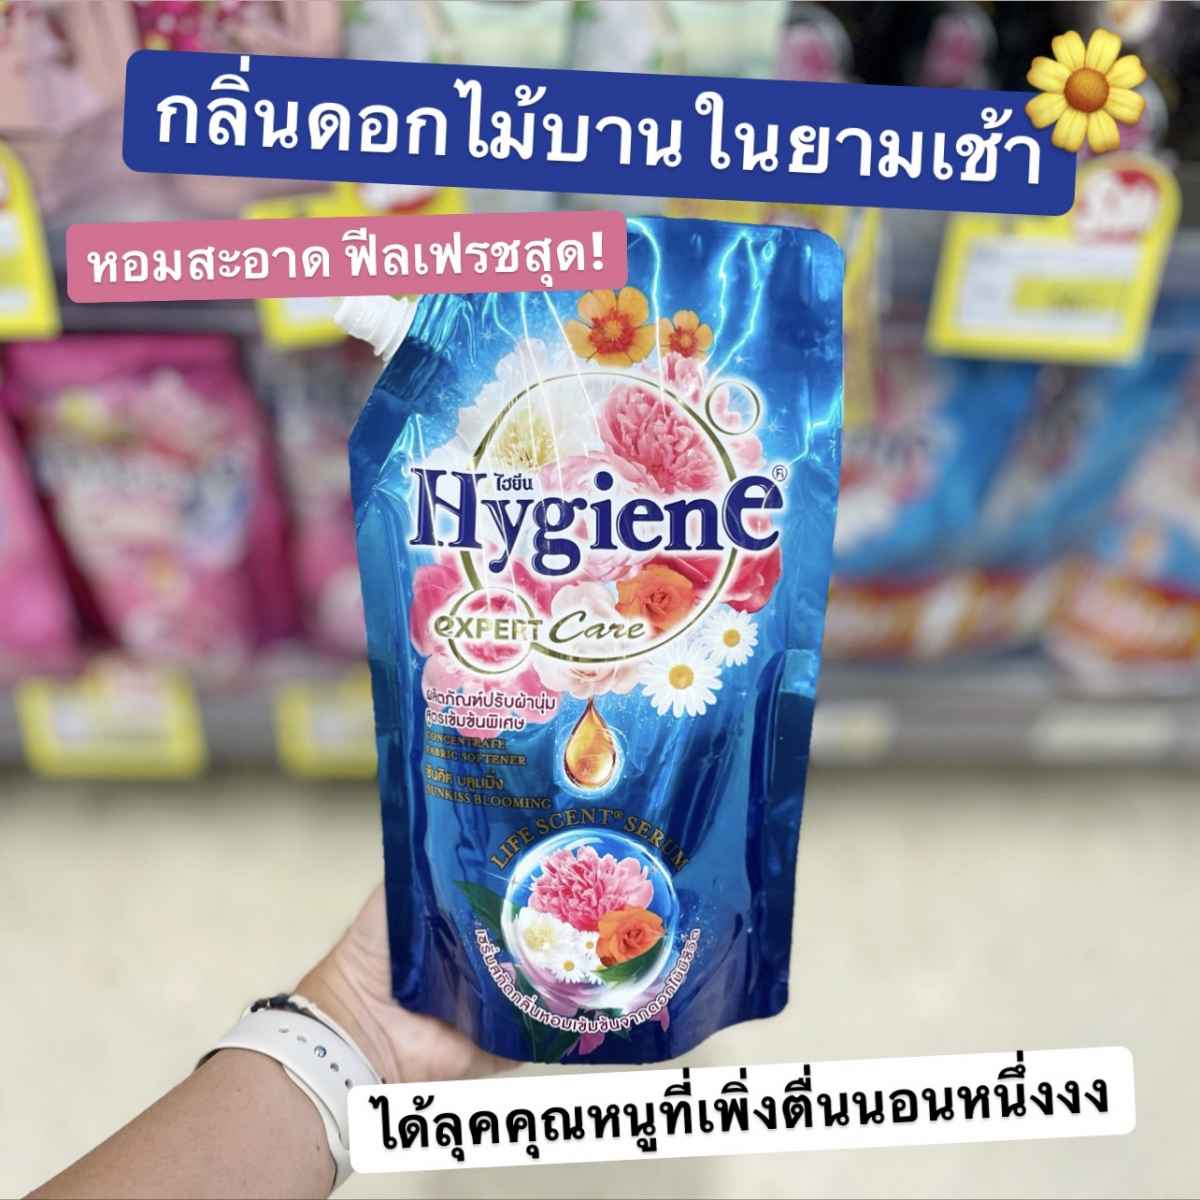 hygiene sunkiss blooming